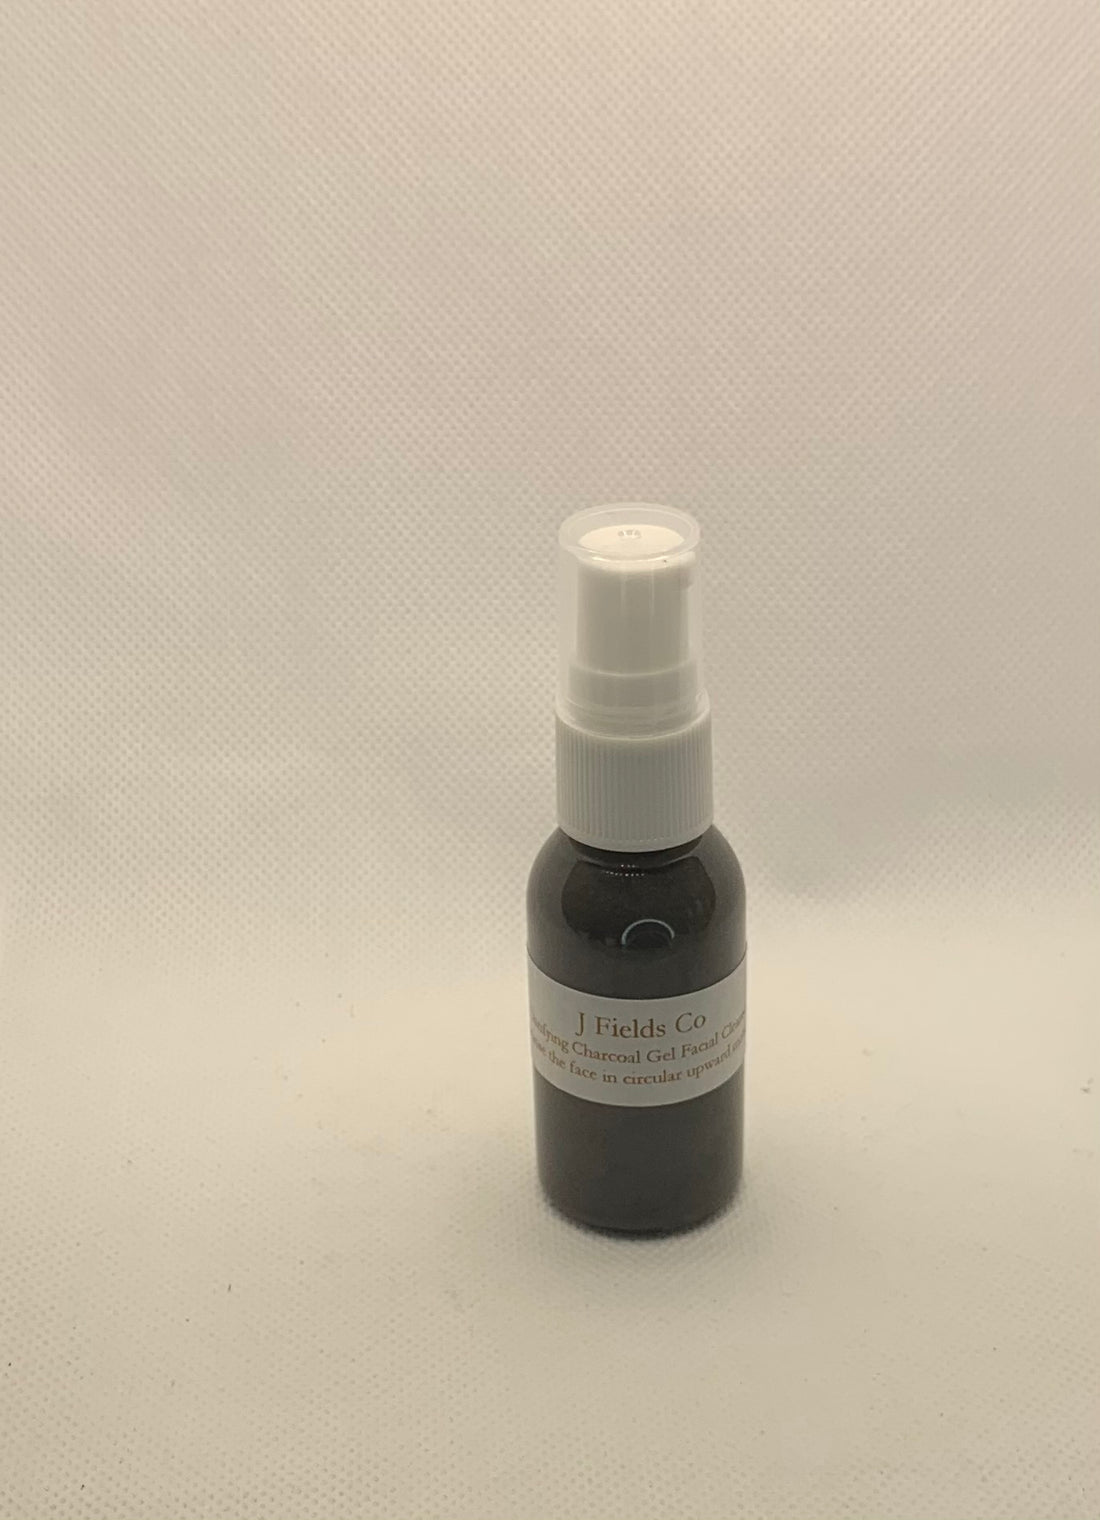 Clarifying Charcoal Gel Facial Cleanser - Sample